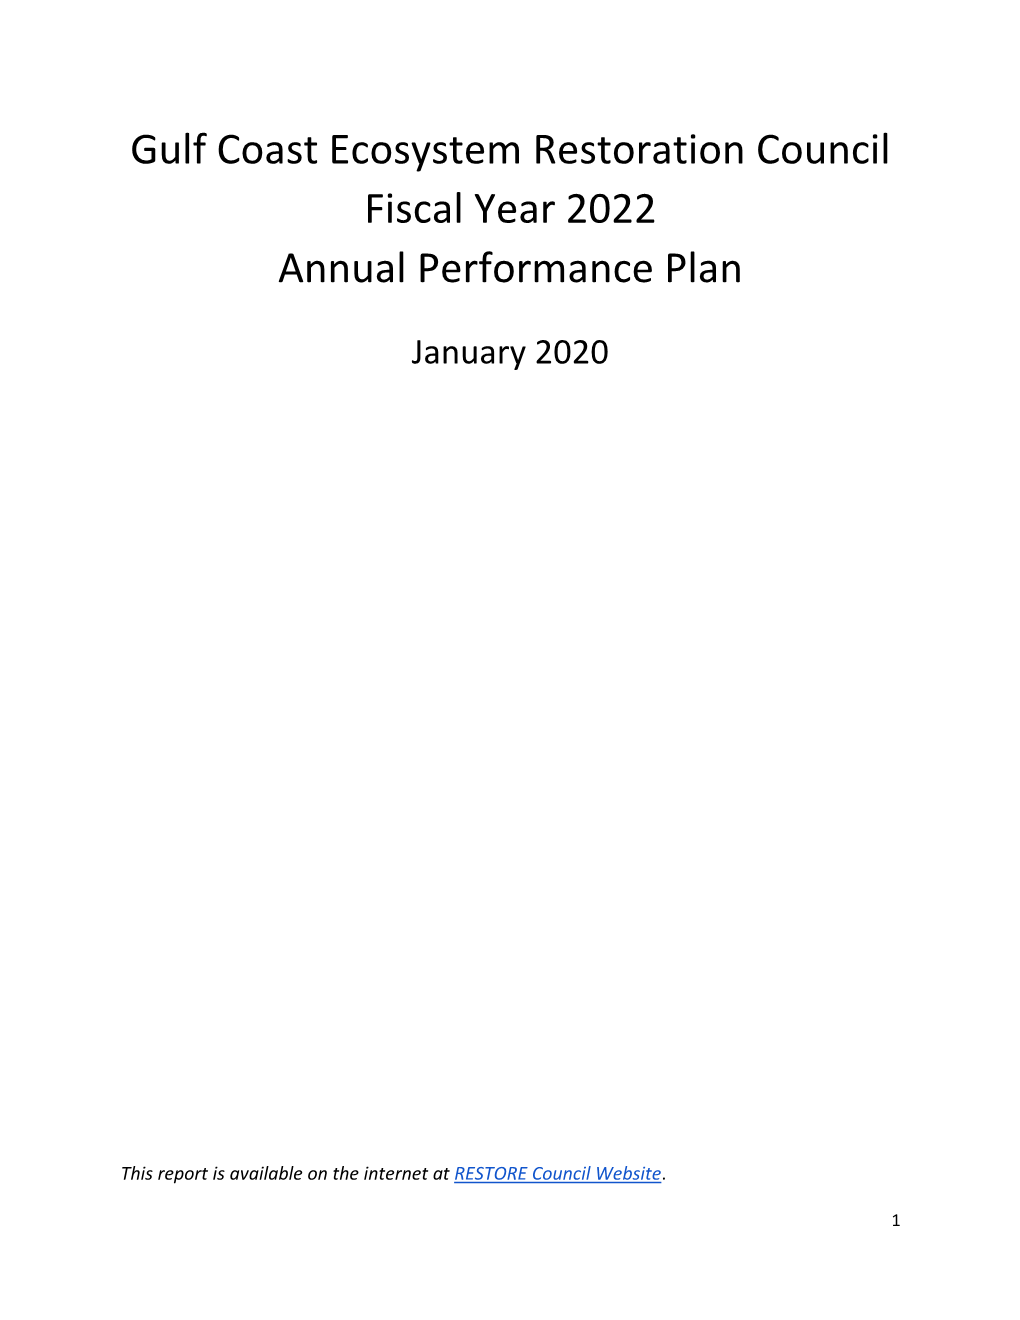 Fiscal Year 2022 Annual Performance Plan